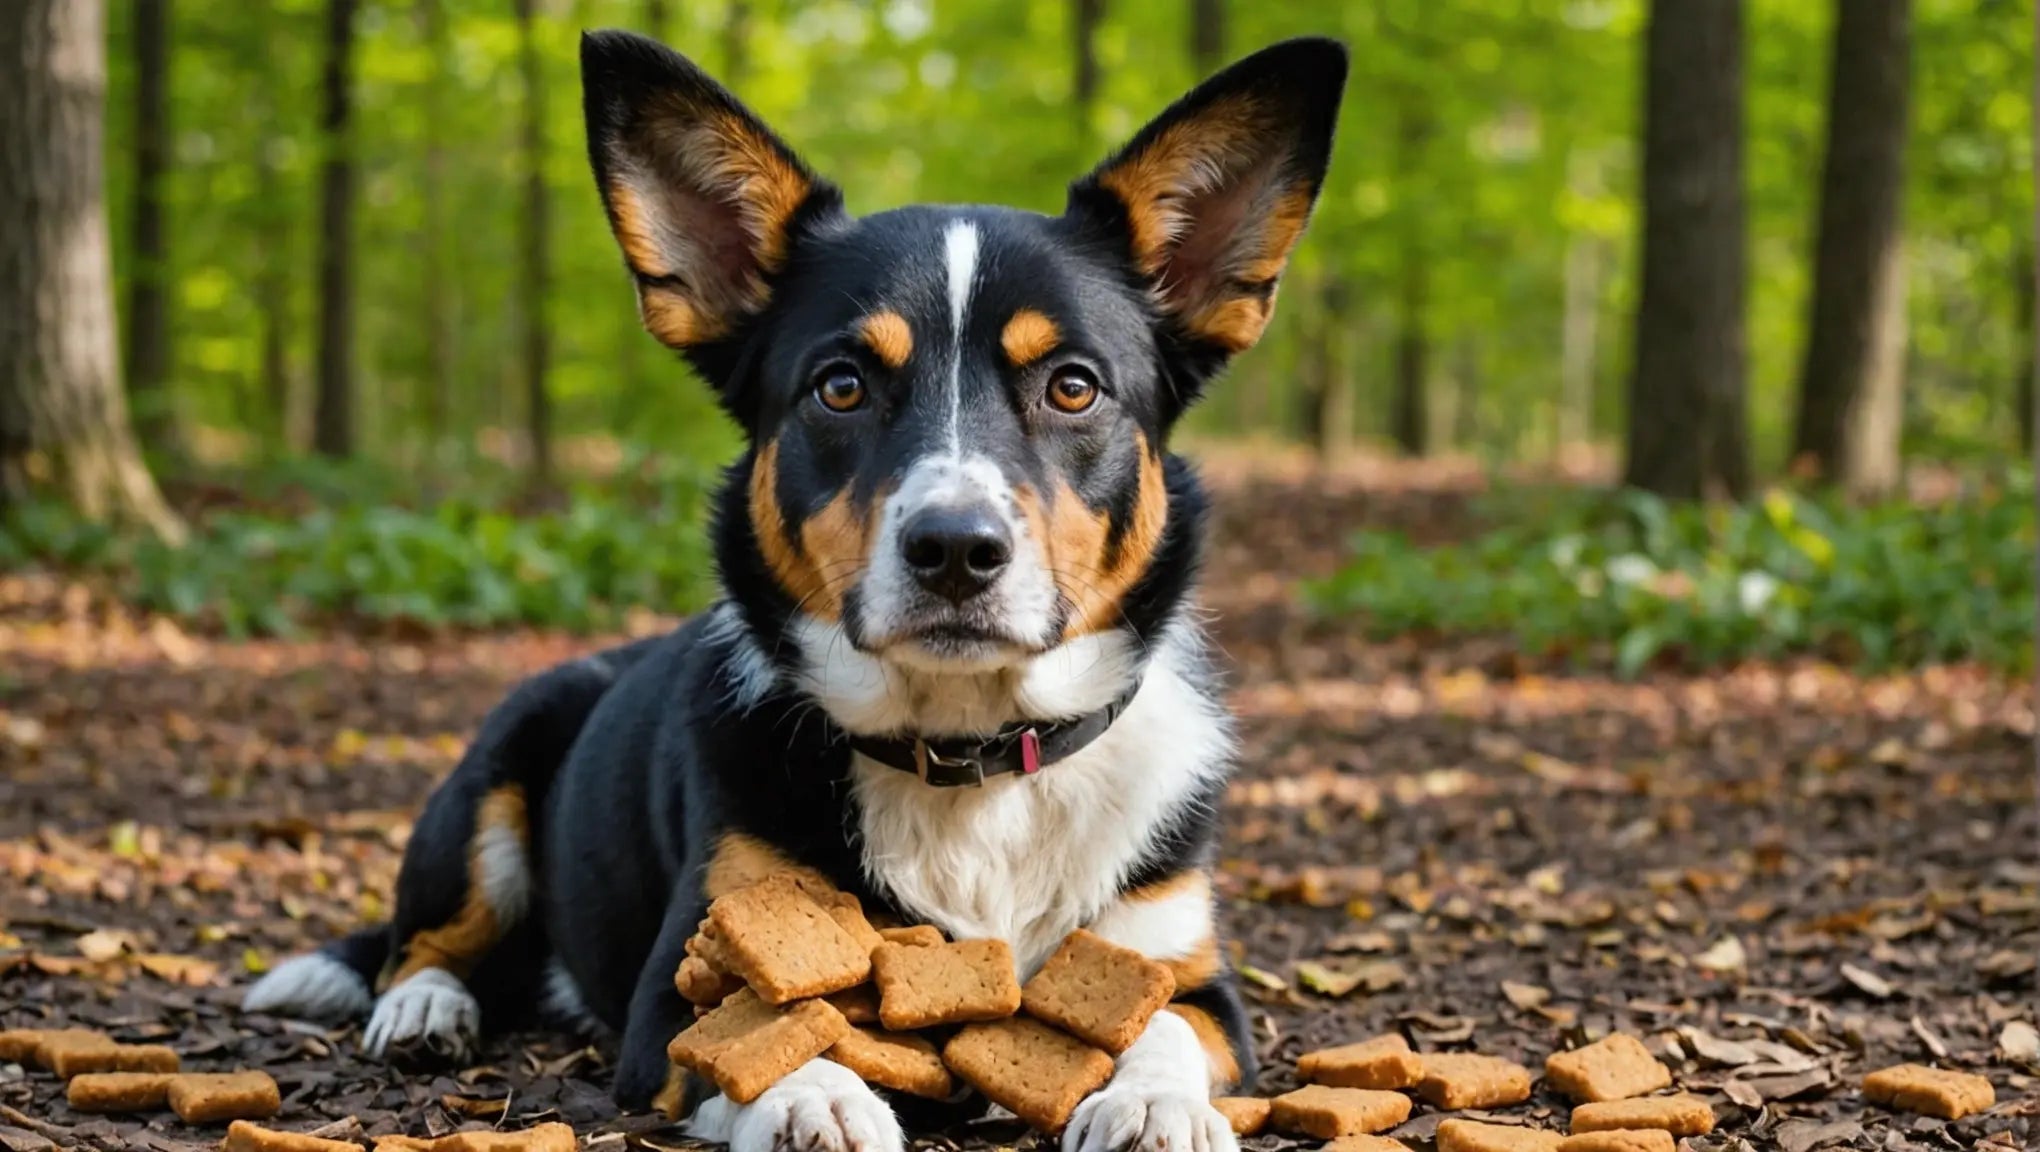 Treat Your Dog to Natural Delights with Natural Dog Treats